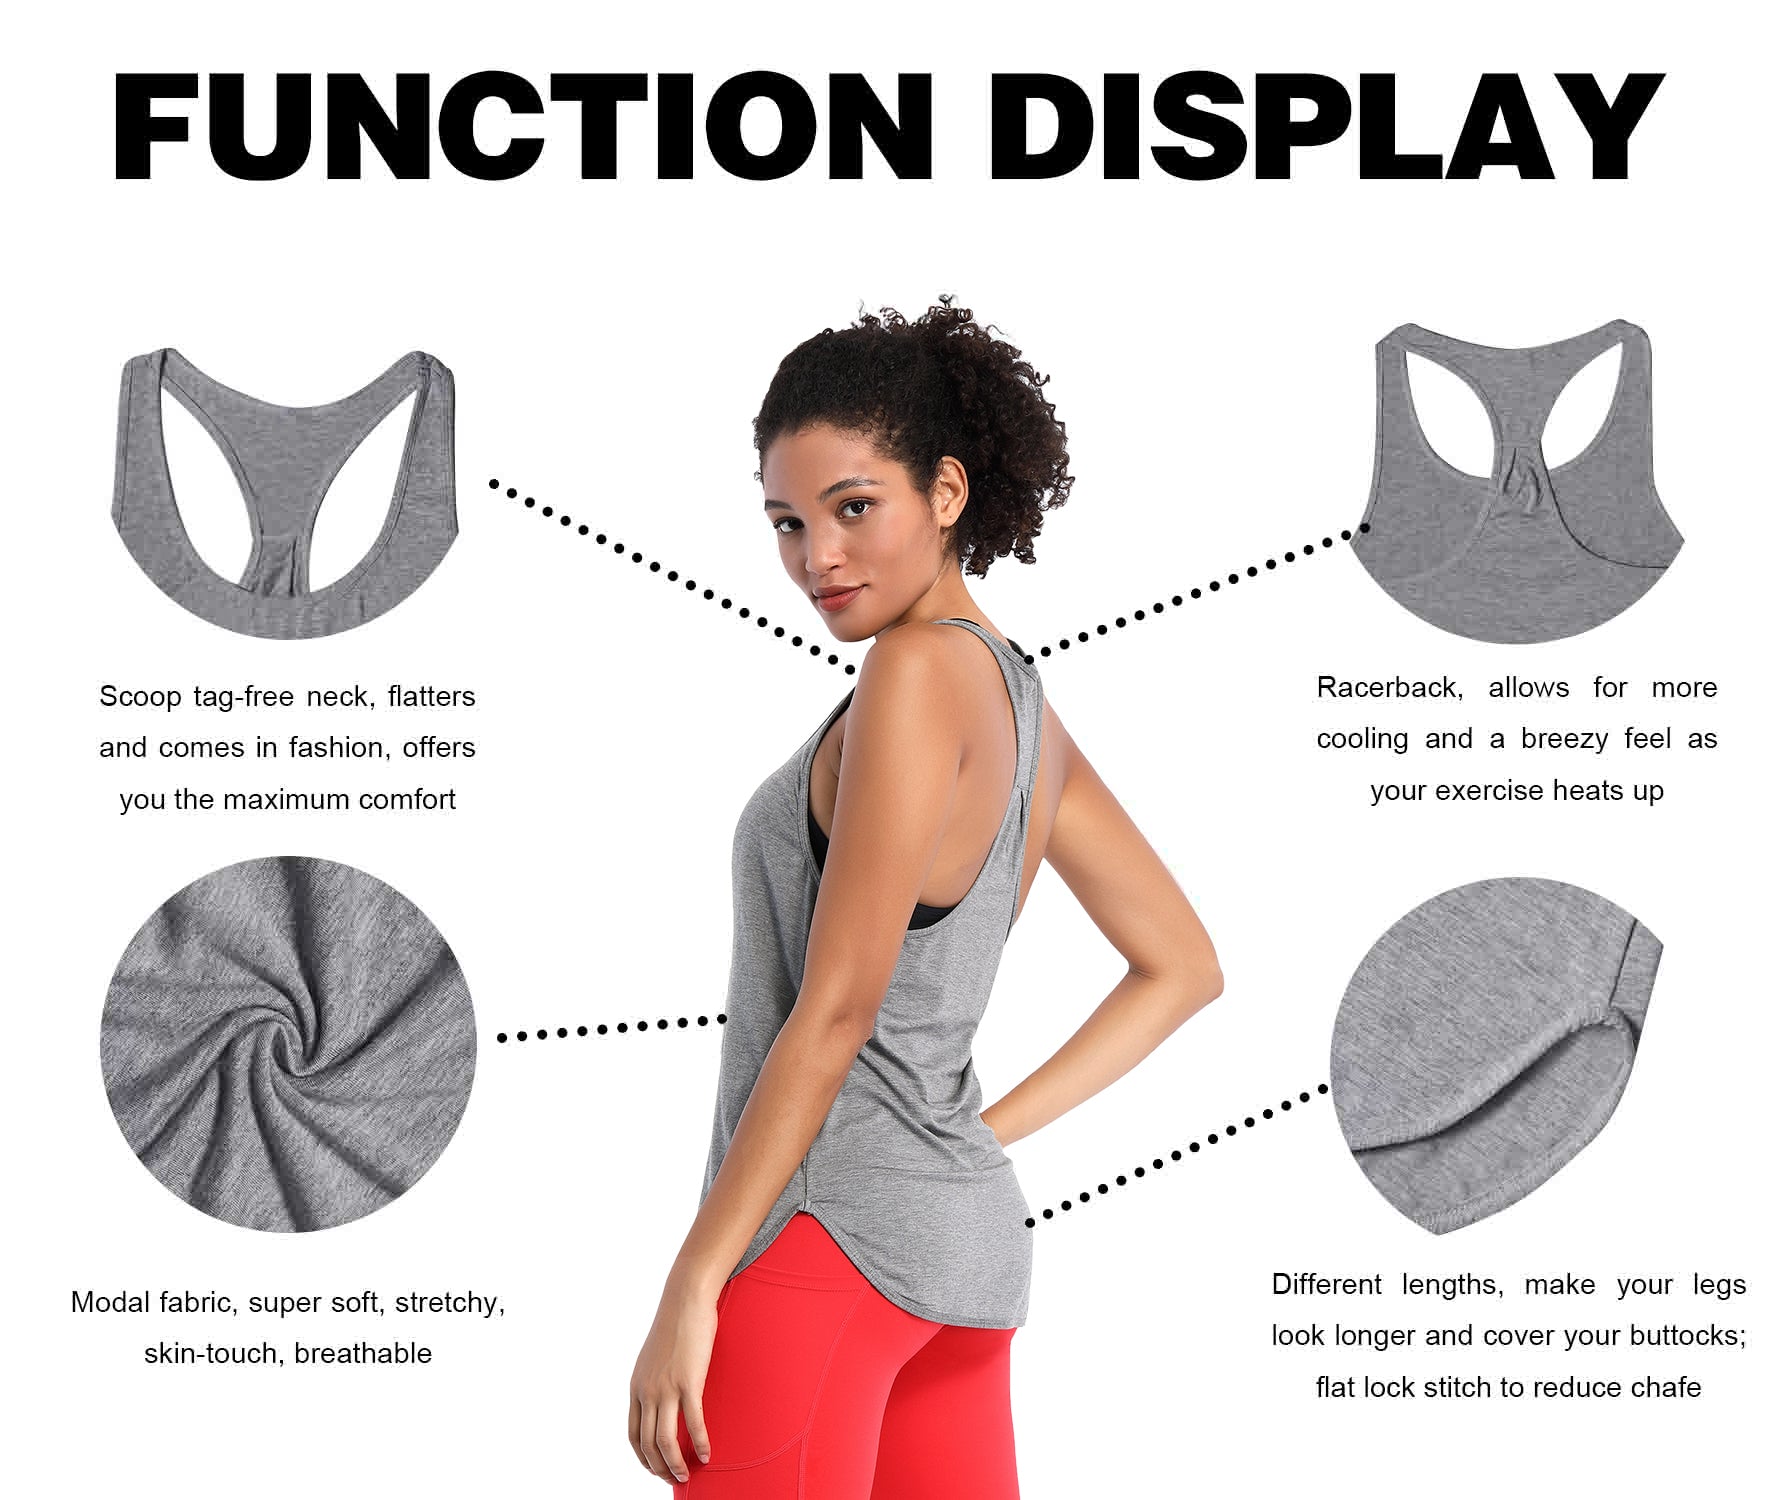 Loose Fit Racerback Tank Top heathergray Designed for On the Move Loose fit 93%Modal/7%Spandex Four-way stretch Naturally breathable Super-Soft, Modal Fabric